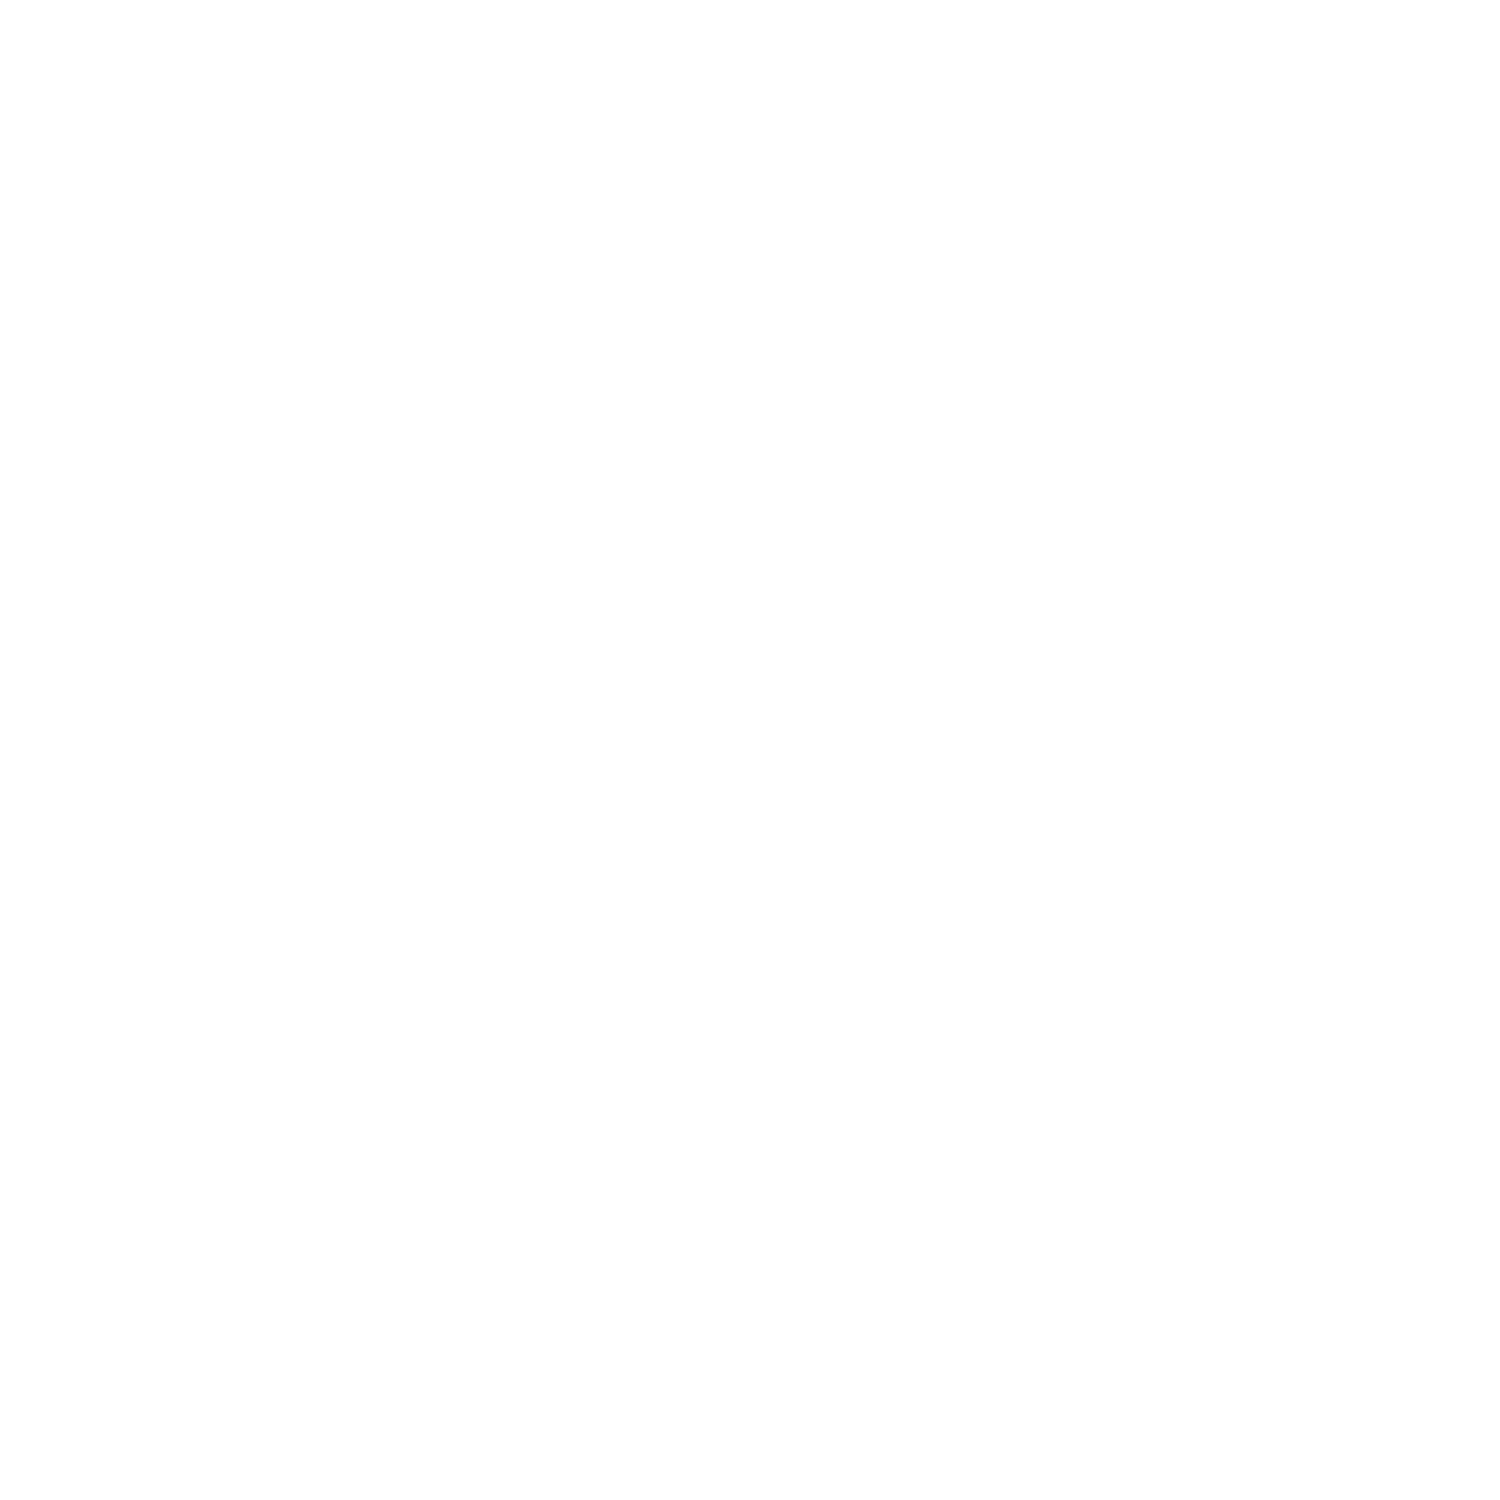 We Are Living Things